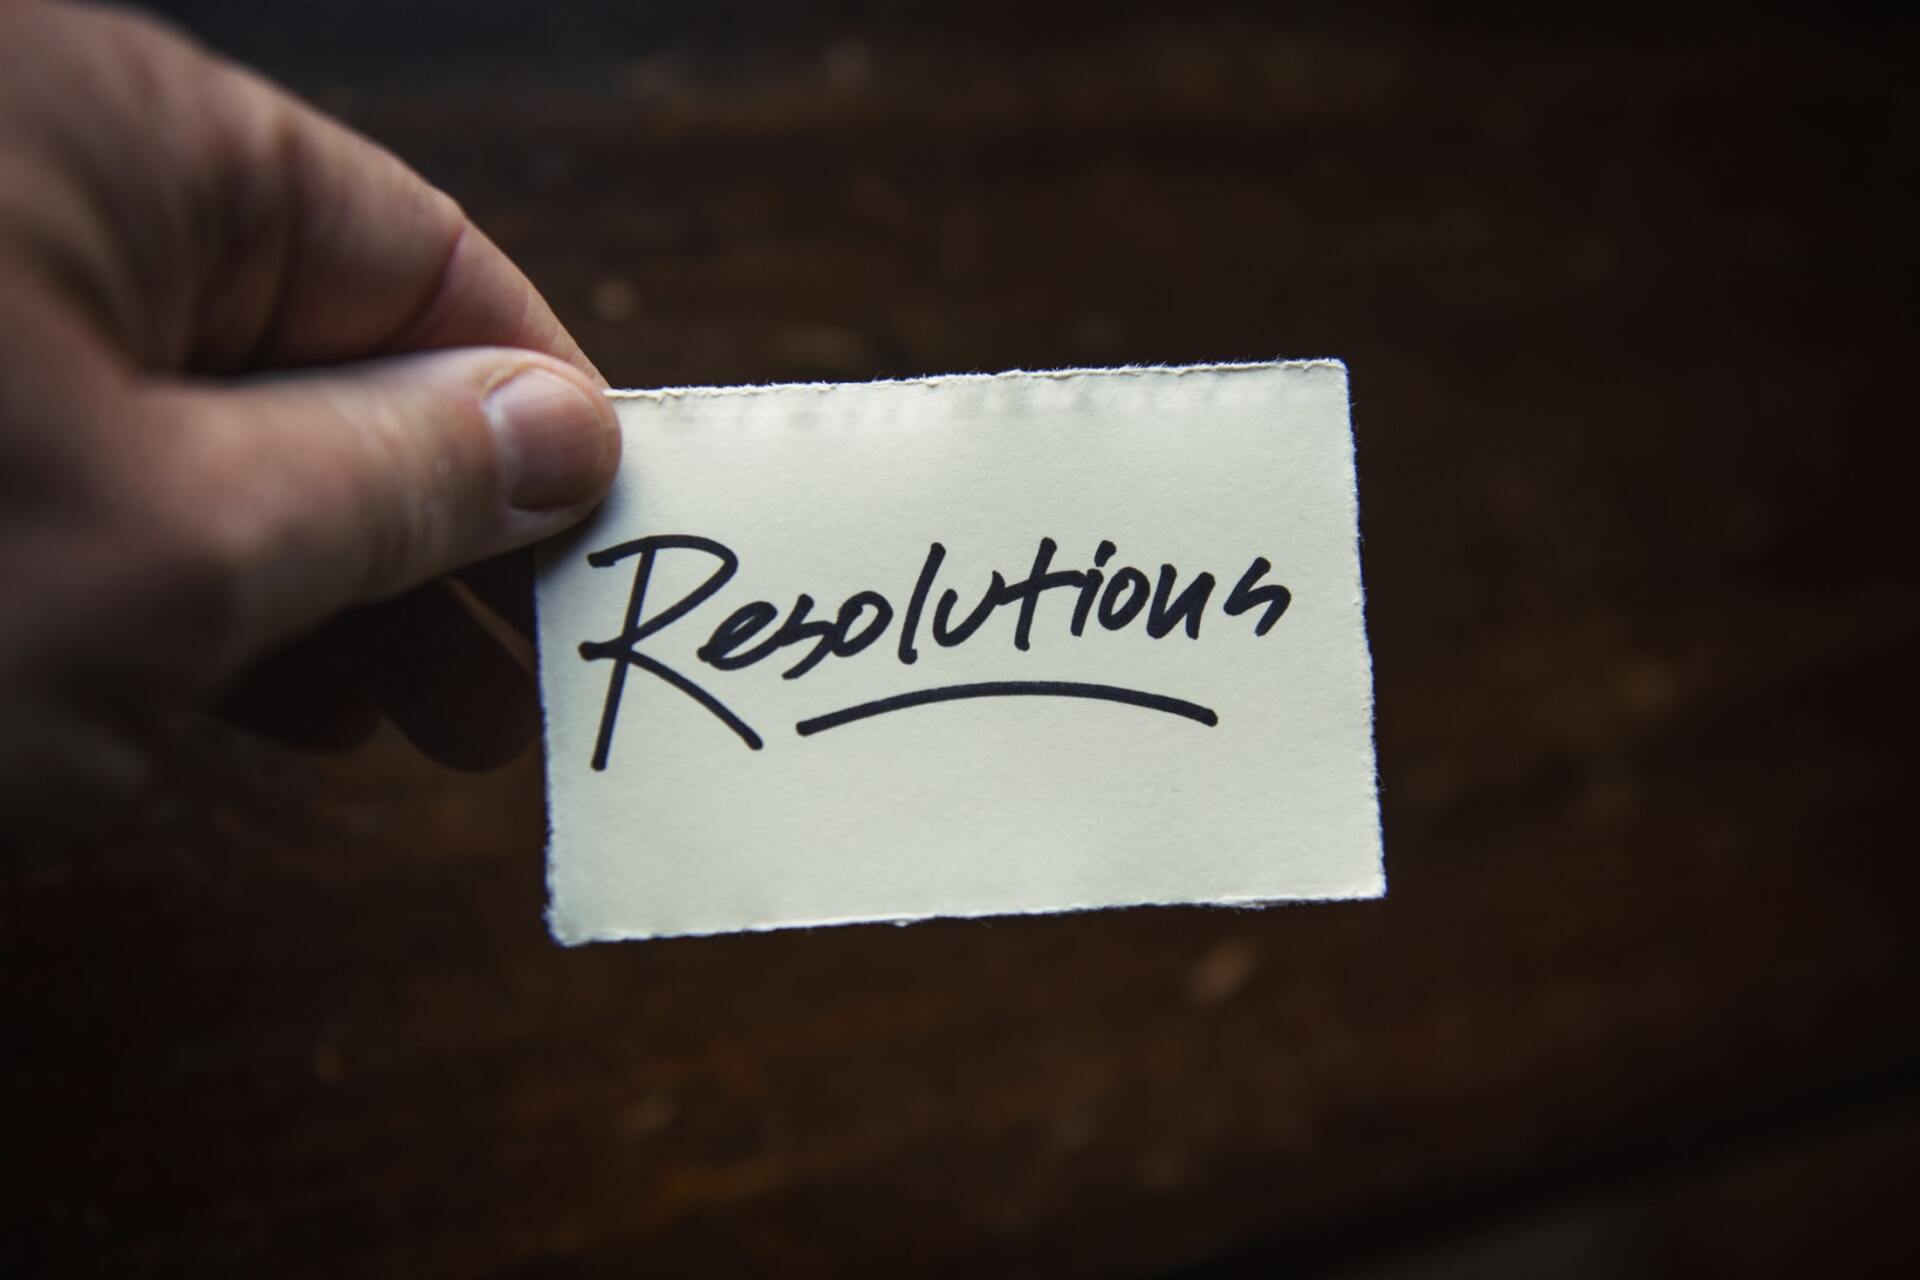 Note with resolutions hand written